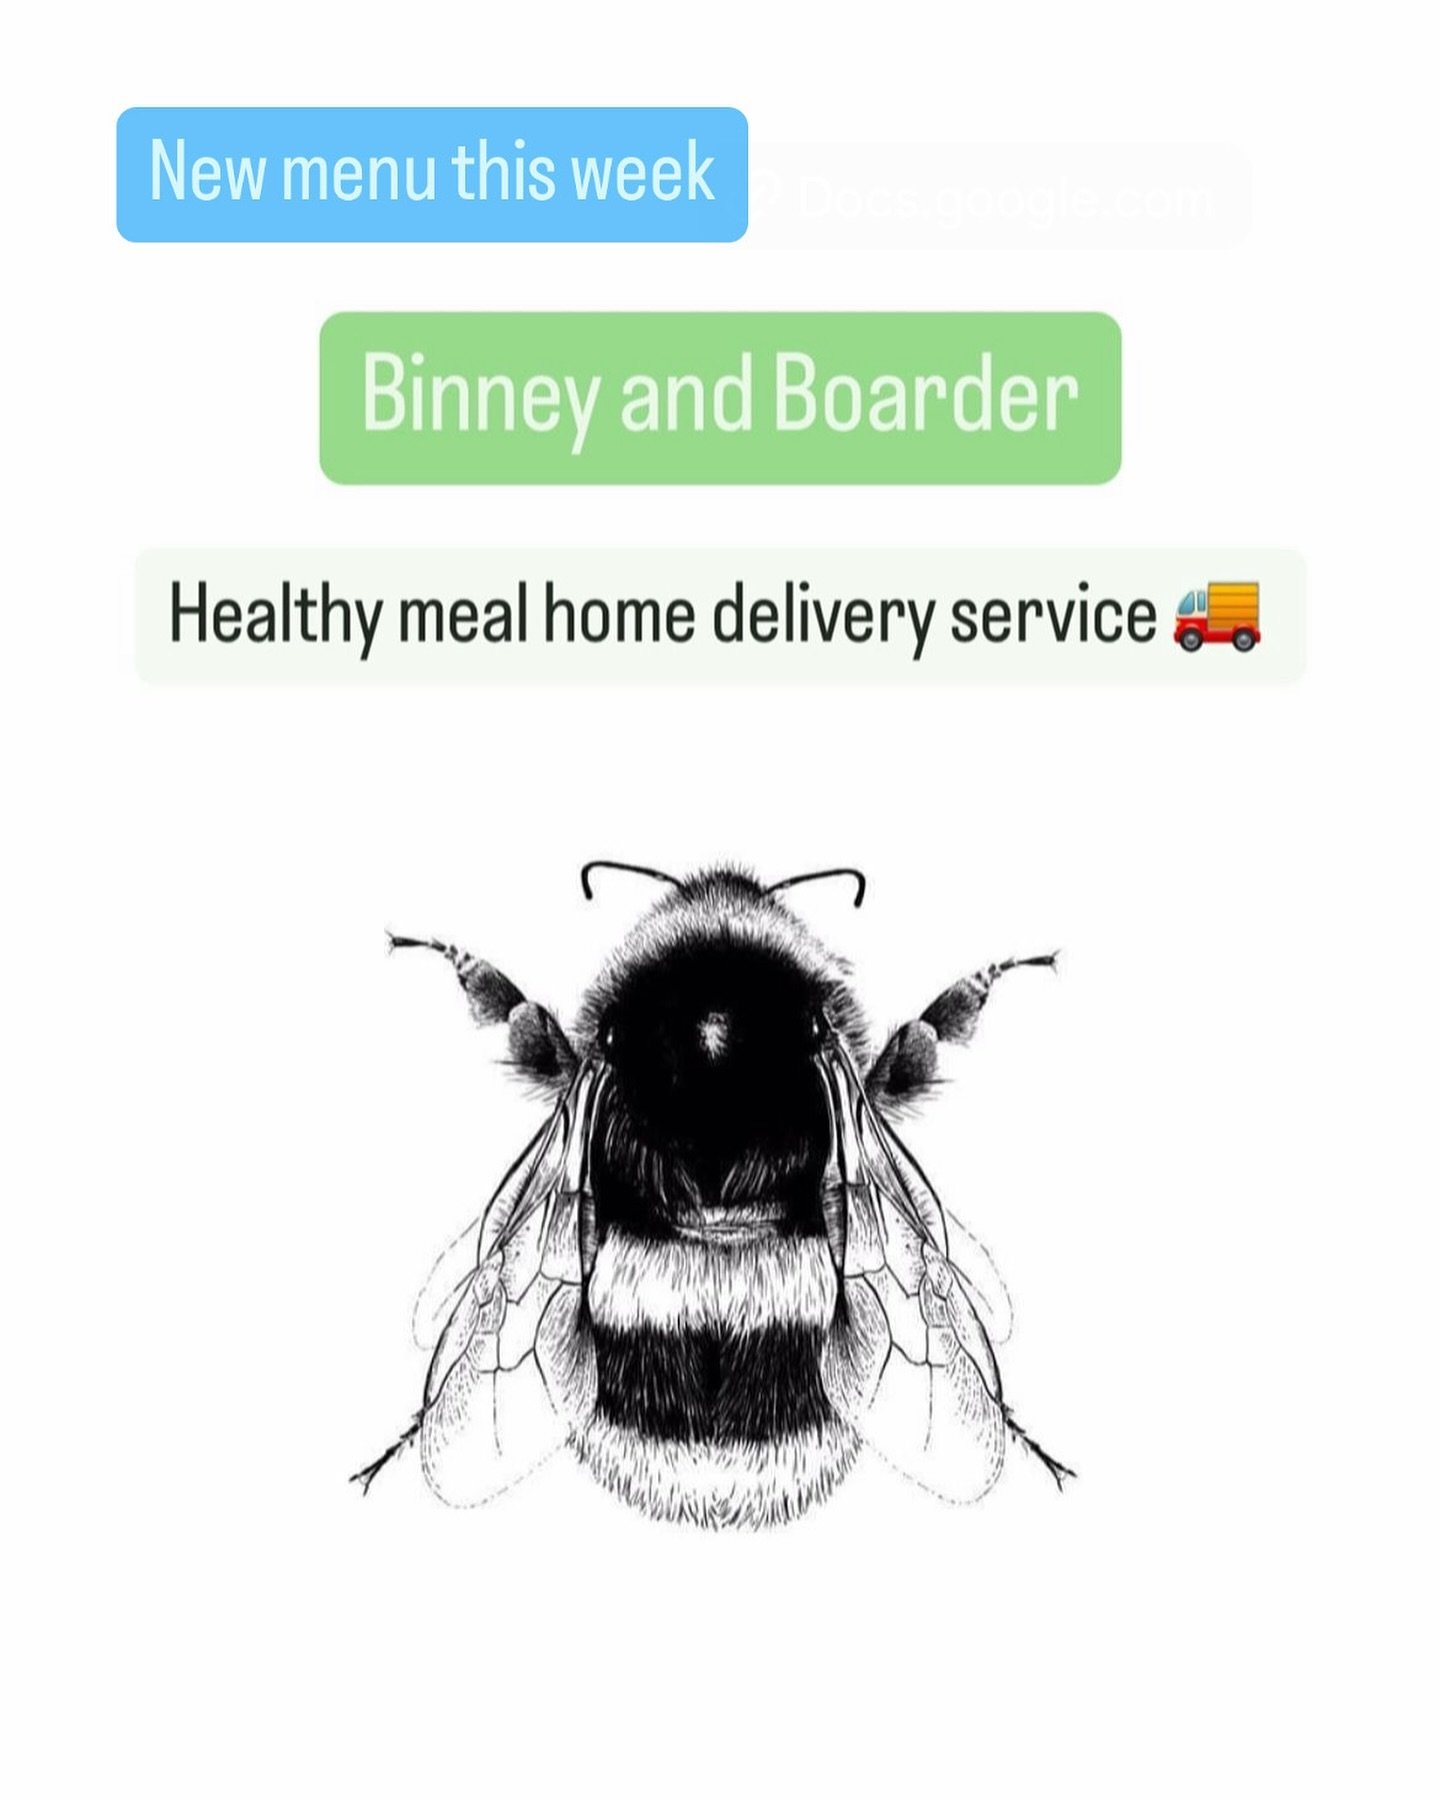 ⭐️ BINNEY and BOARDER healthy meal home delivery opportunity ⭐️

🚚 🥦 🧄 🧅

Next week the beautiful food company BINNEY and BOARDER will be supporting my DIGESTIVE WELLNESS course with healthy homemade dishes delivered to your door - using their fr